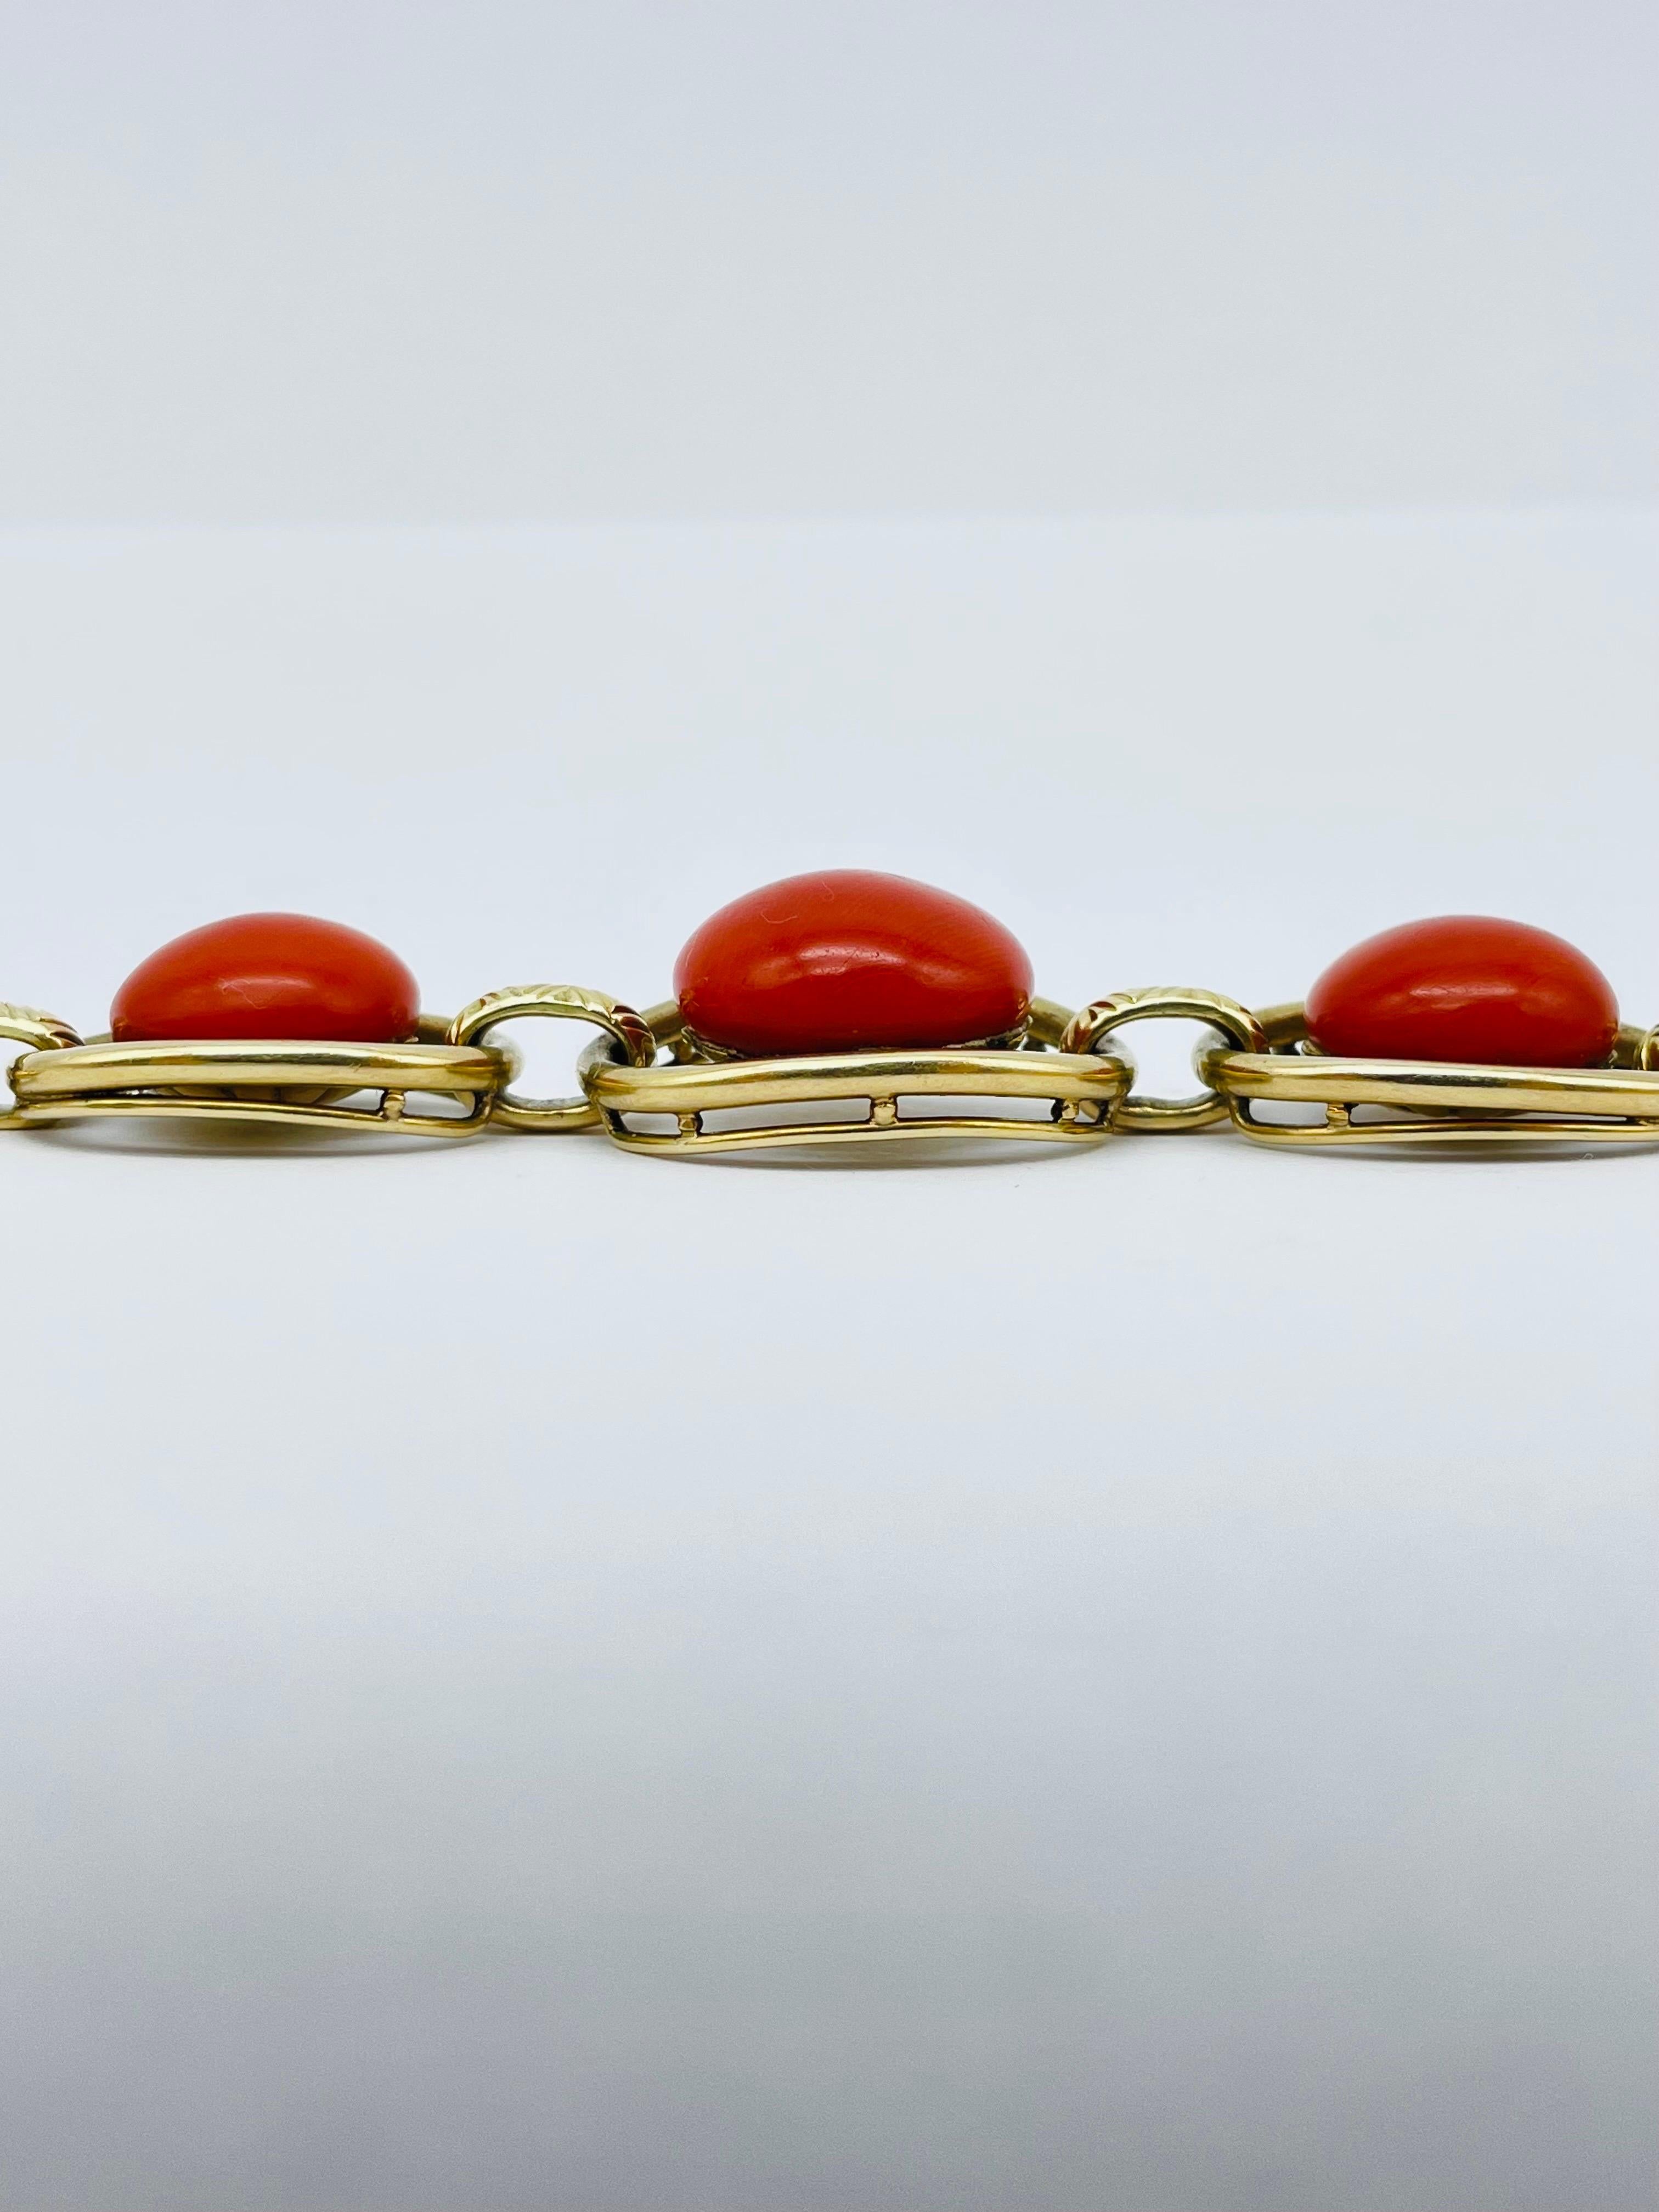 Exceptional Bracelet 14k Gold Link Chain Red Coral For Sale 2